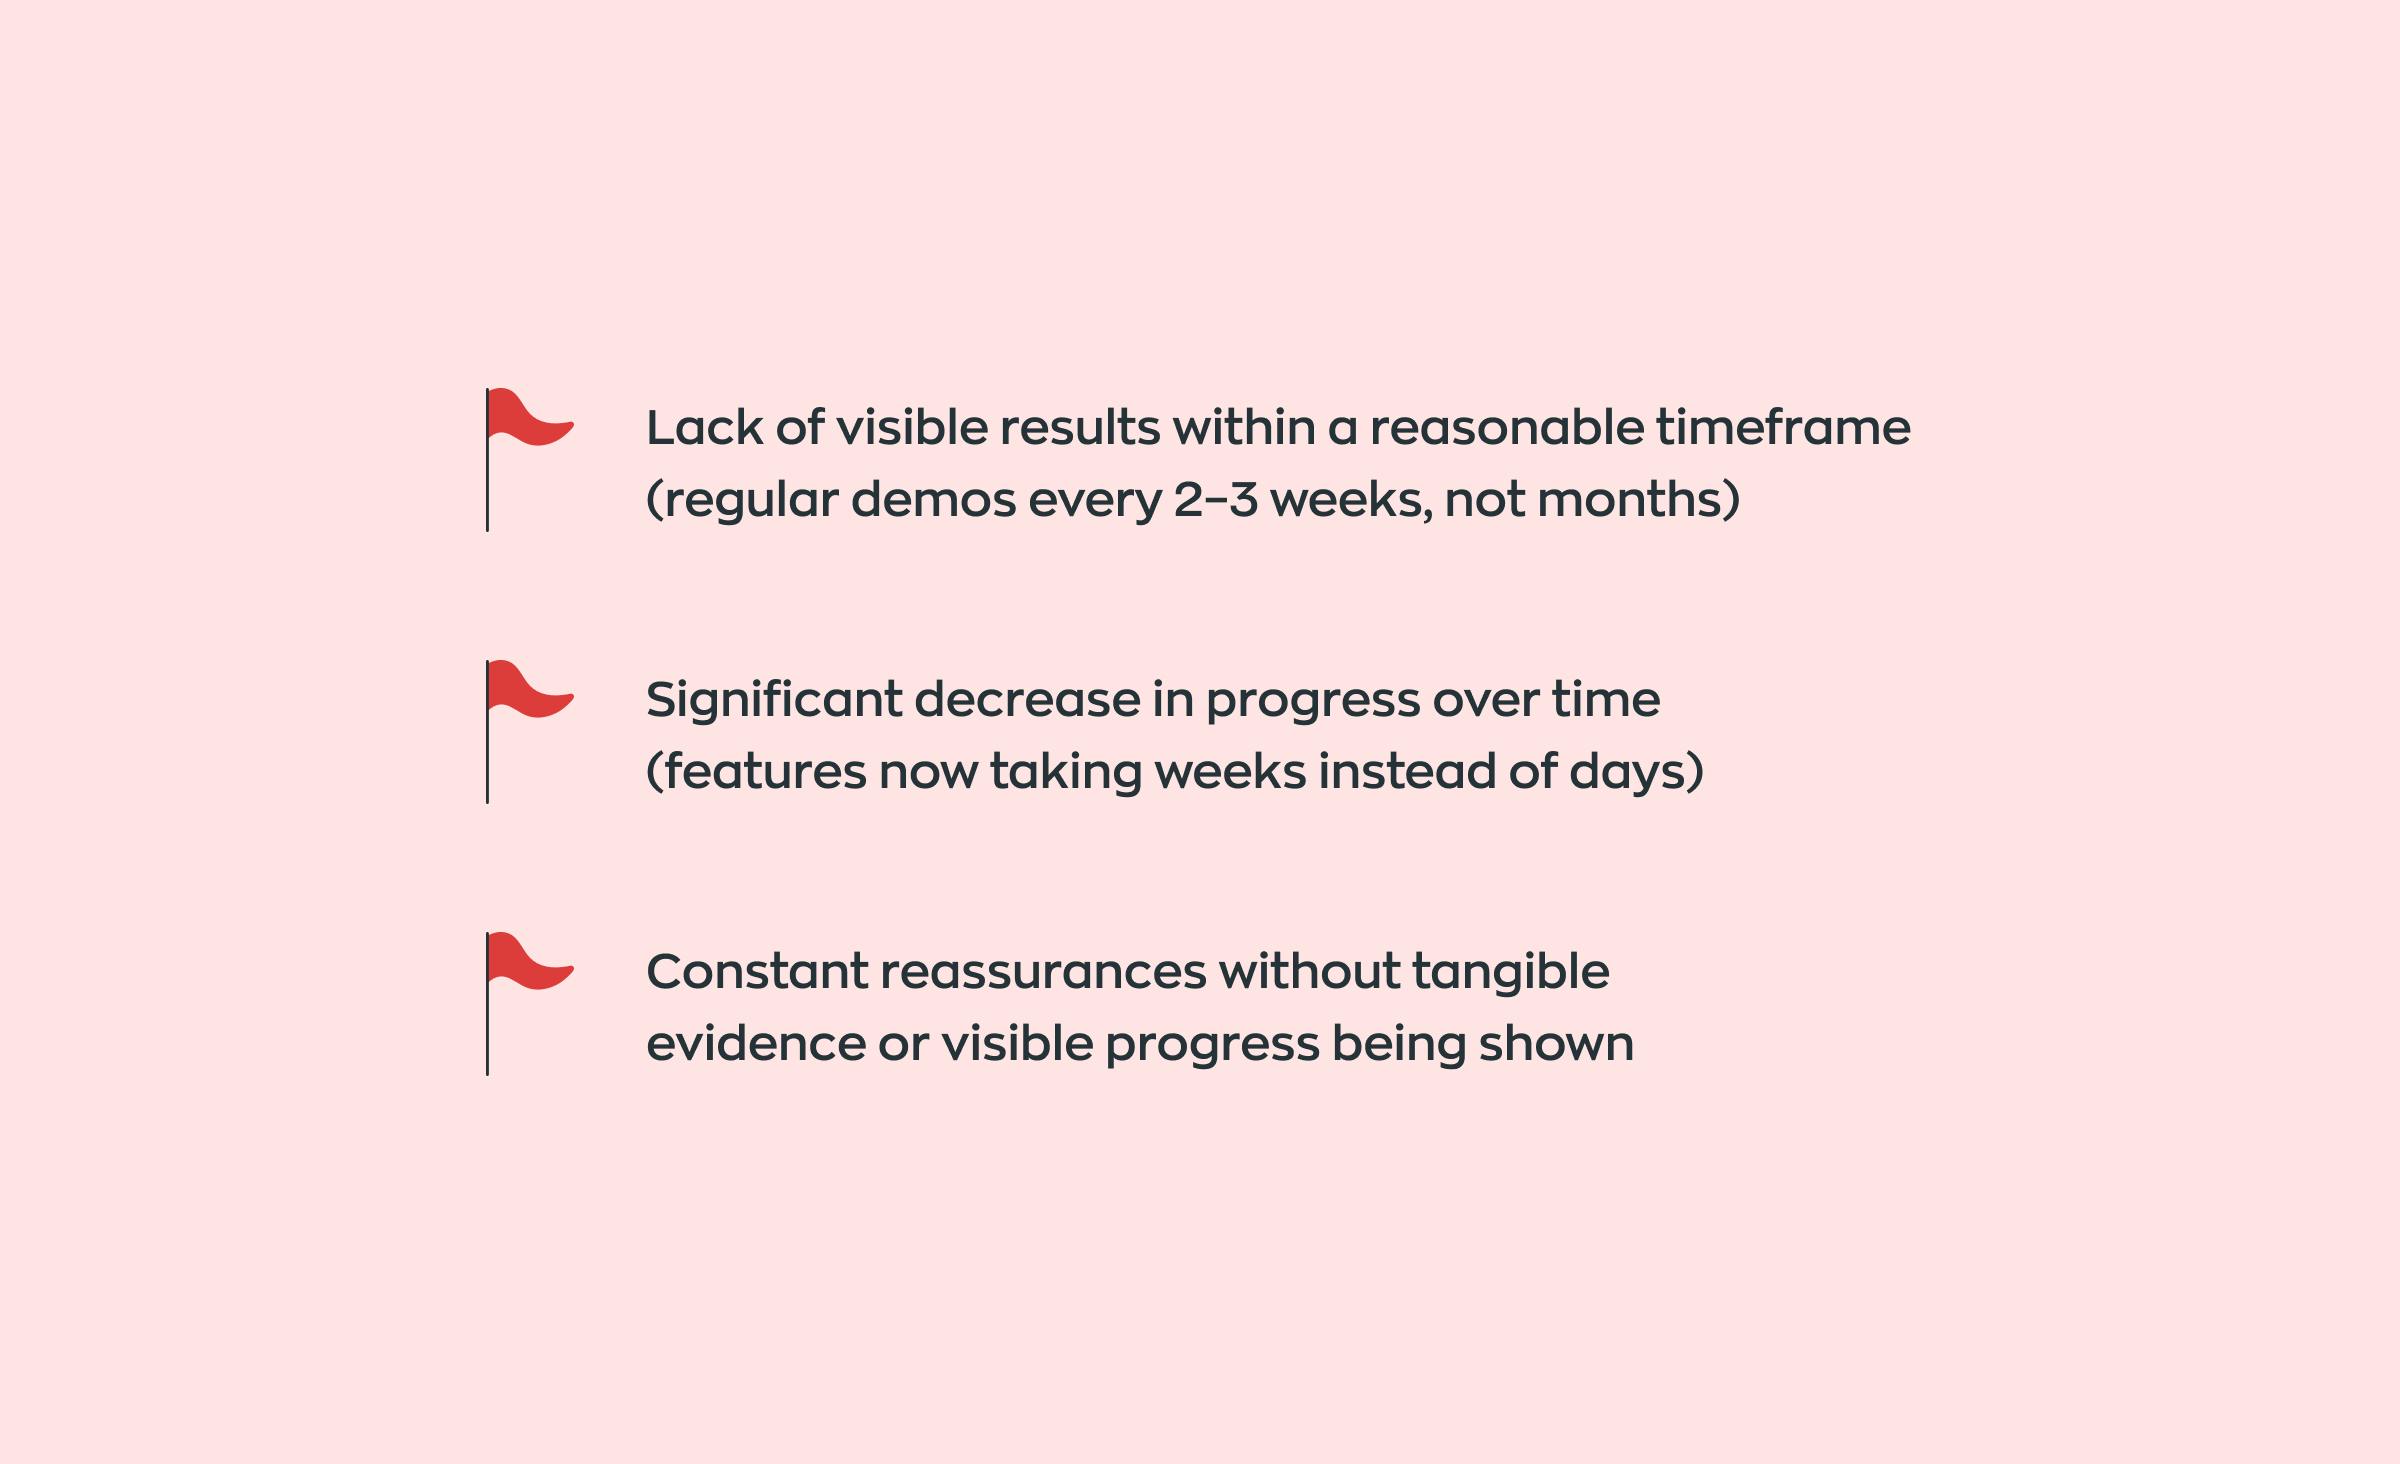 The picture highlights important warning signs to consider when selecting a software development company. The list includes: 1. Lack of visible results within reasonable timeframe (regular demos every 2-3 weeks, not months). 2. Significant decrease in progress over time (features now taking weeks instead of days). 3. Constant reassurances without tangible evidence or visible progress being shown.